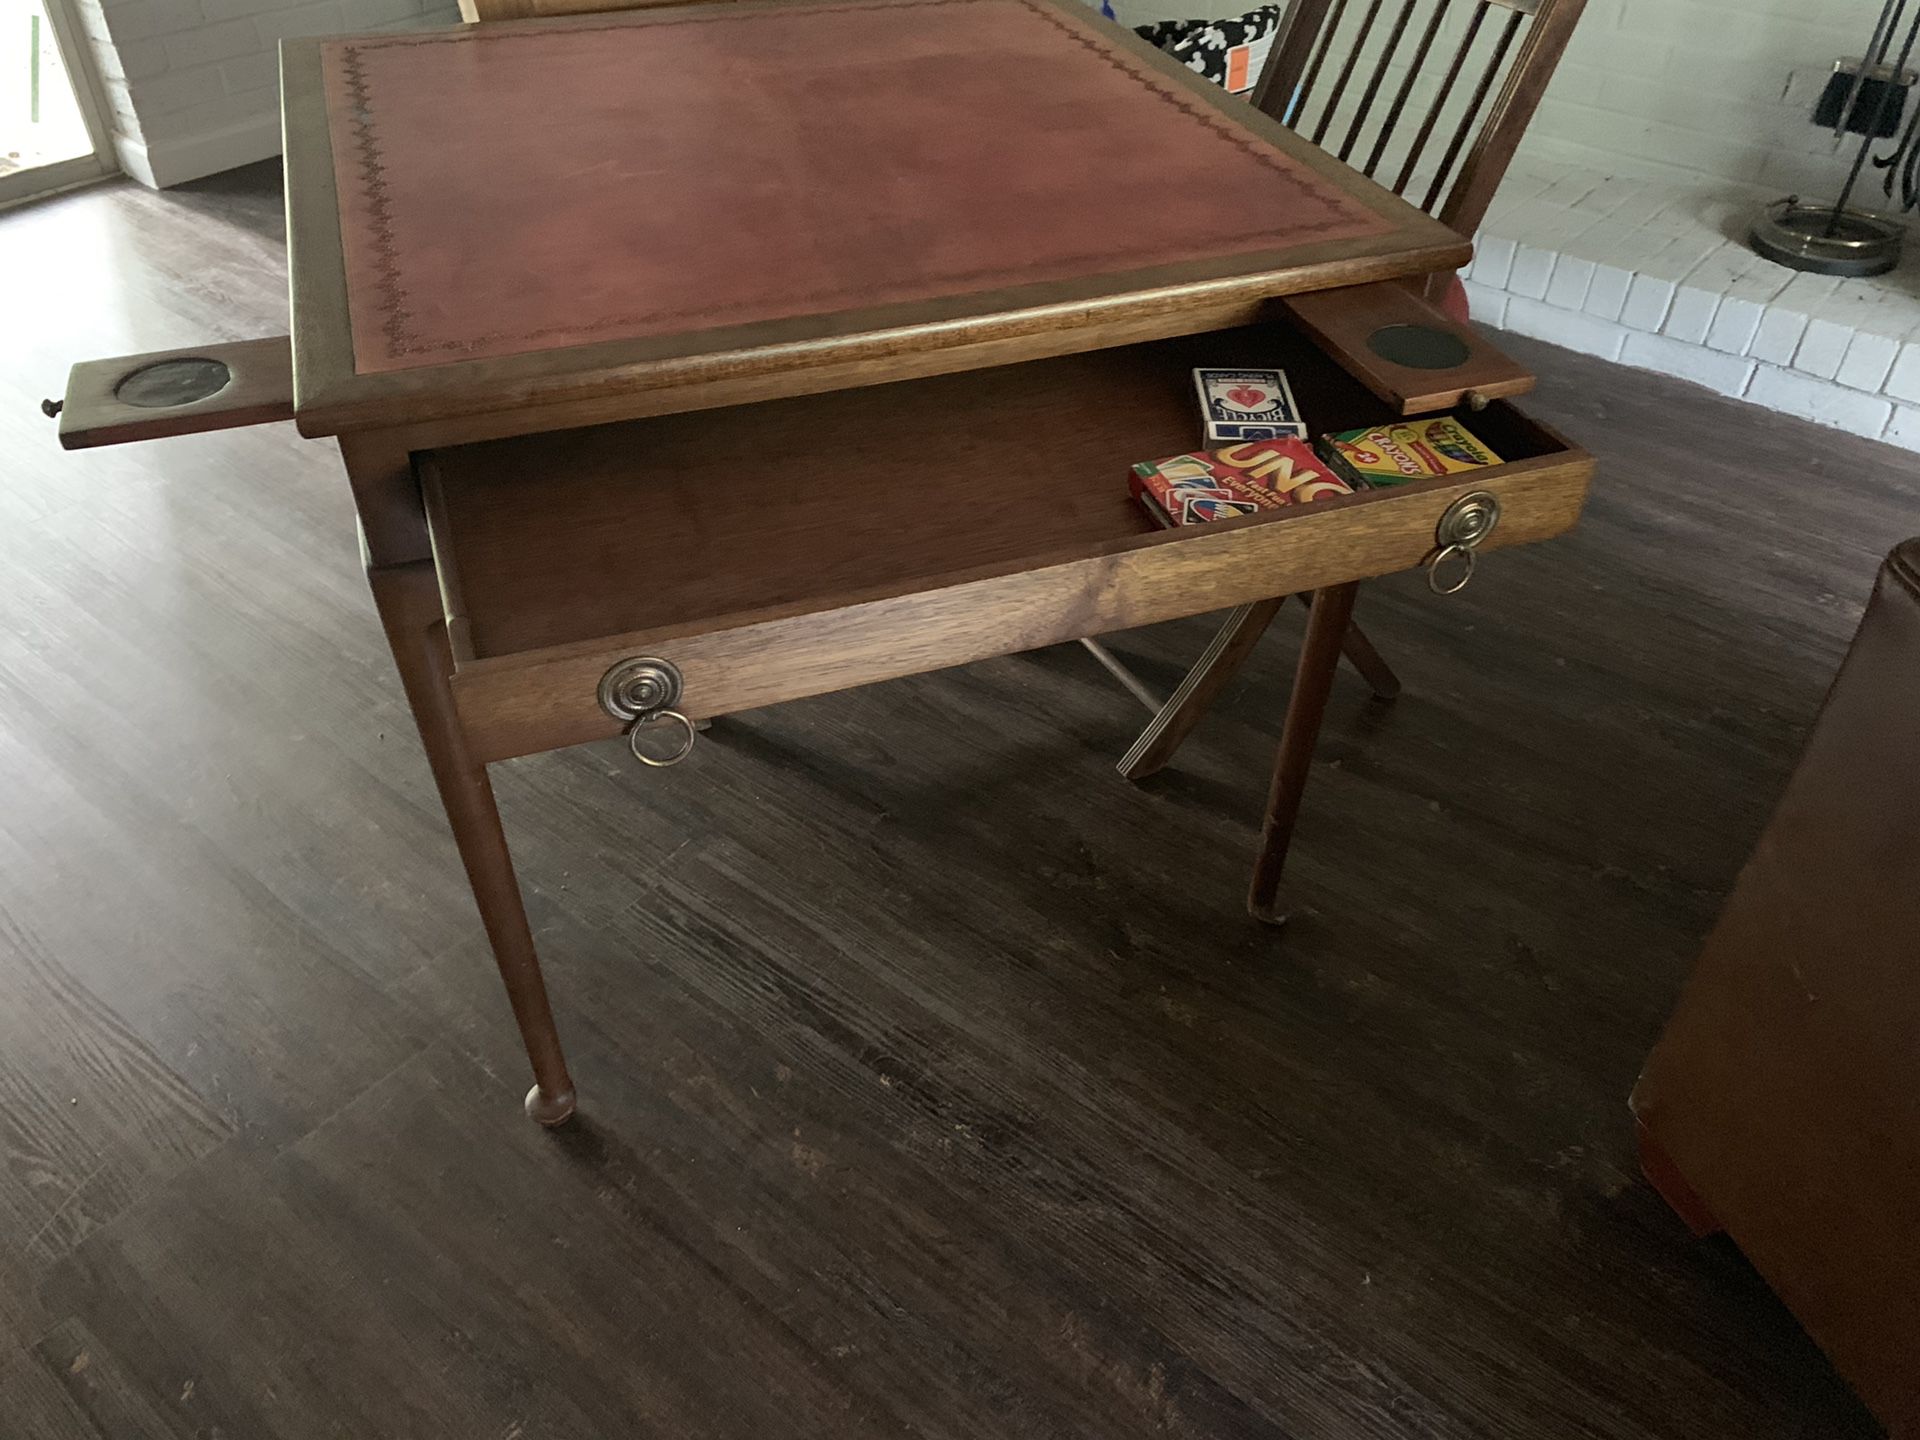 Antique leather top card table